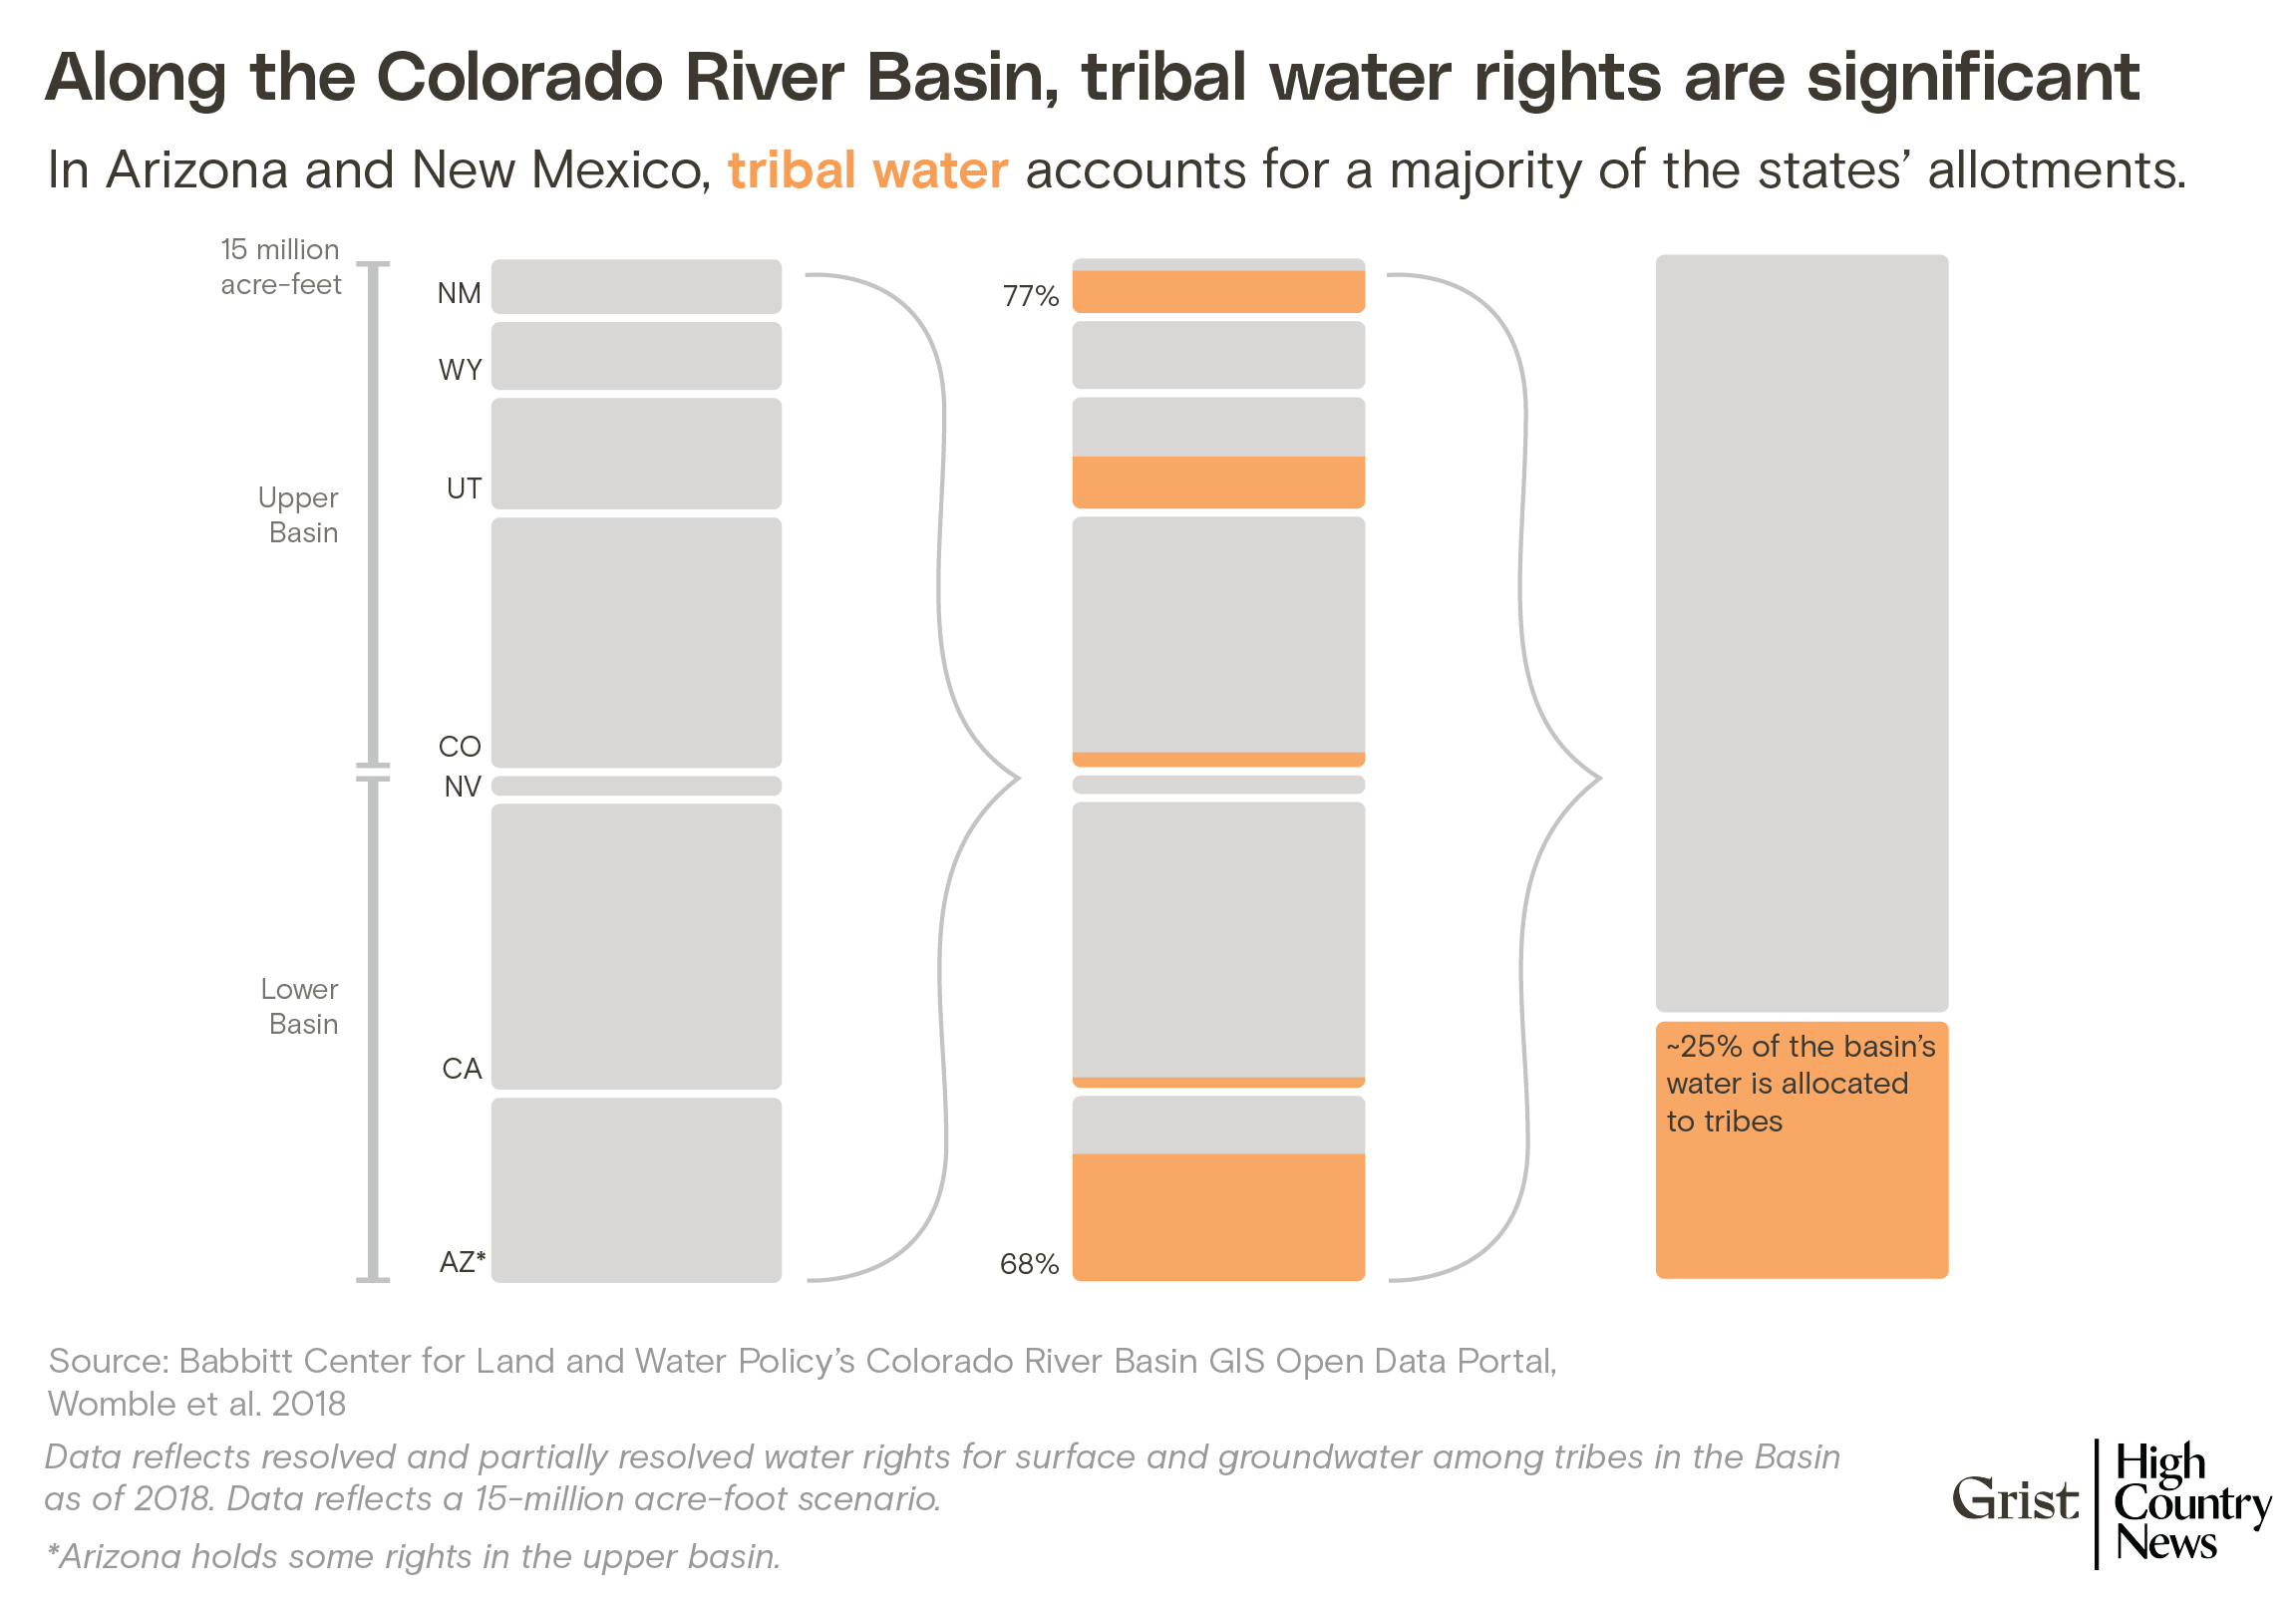 Vertical stacked bar chart showing the proportion of water allocated to tribes under state allocations from the Colorado River Basin.